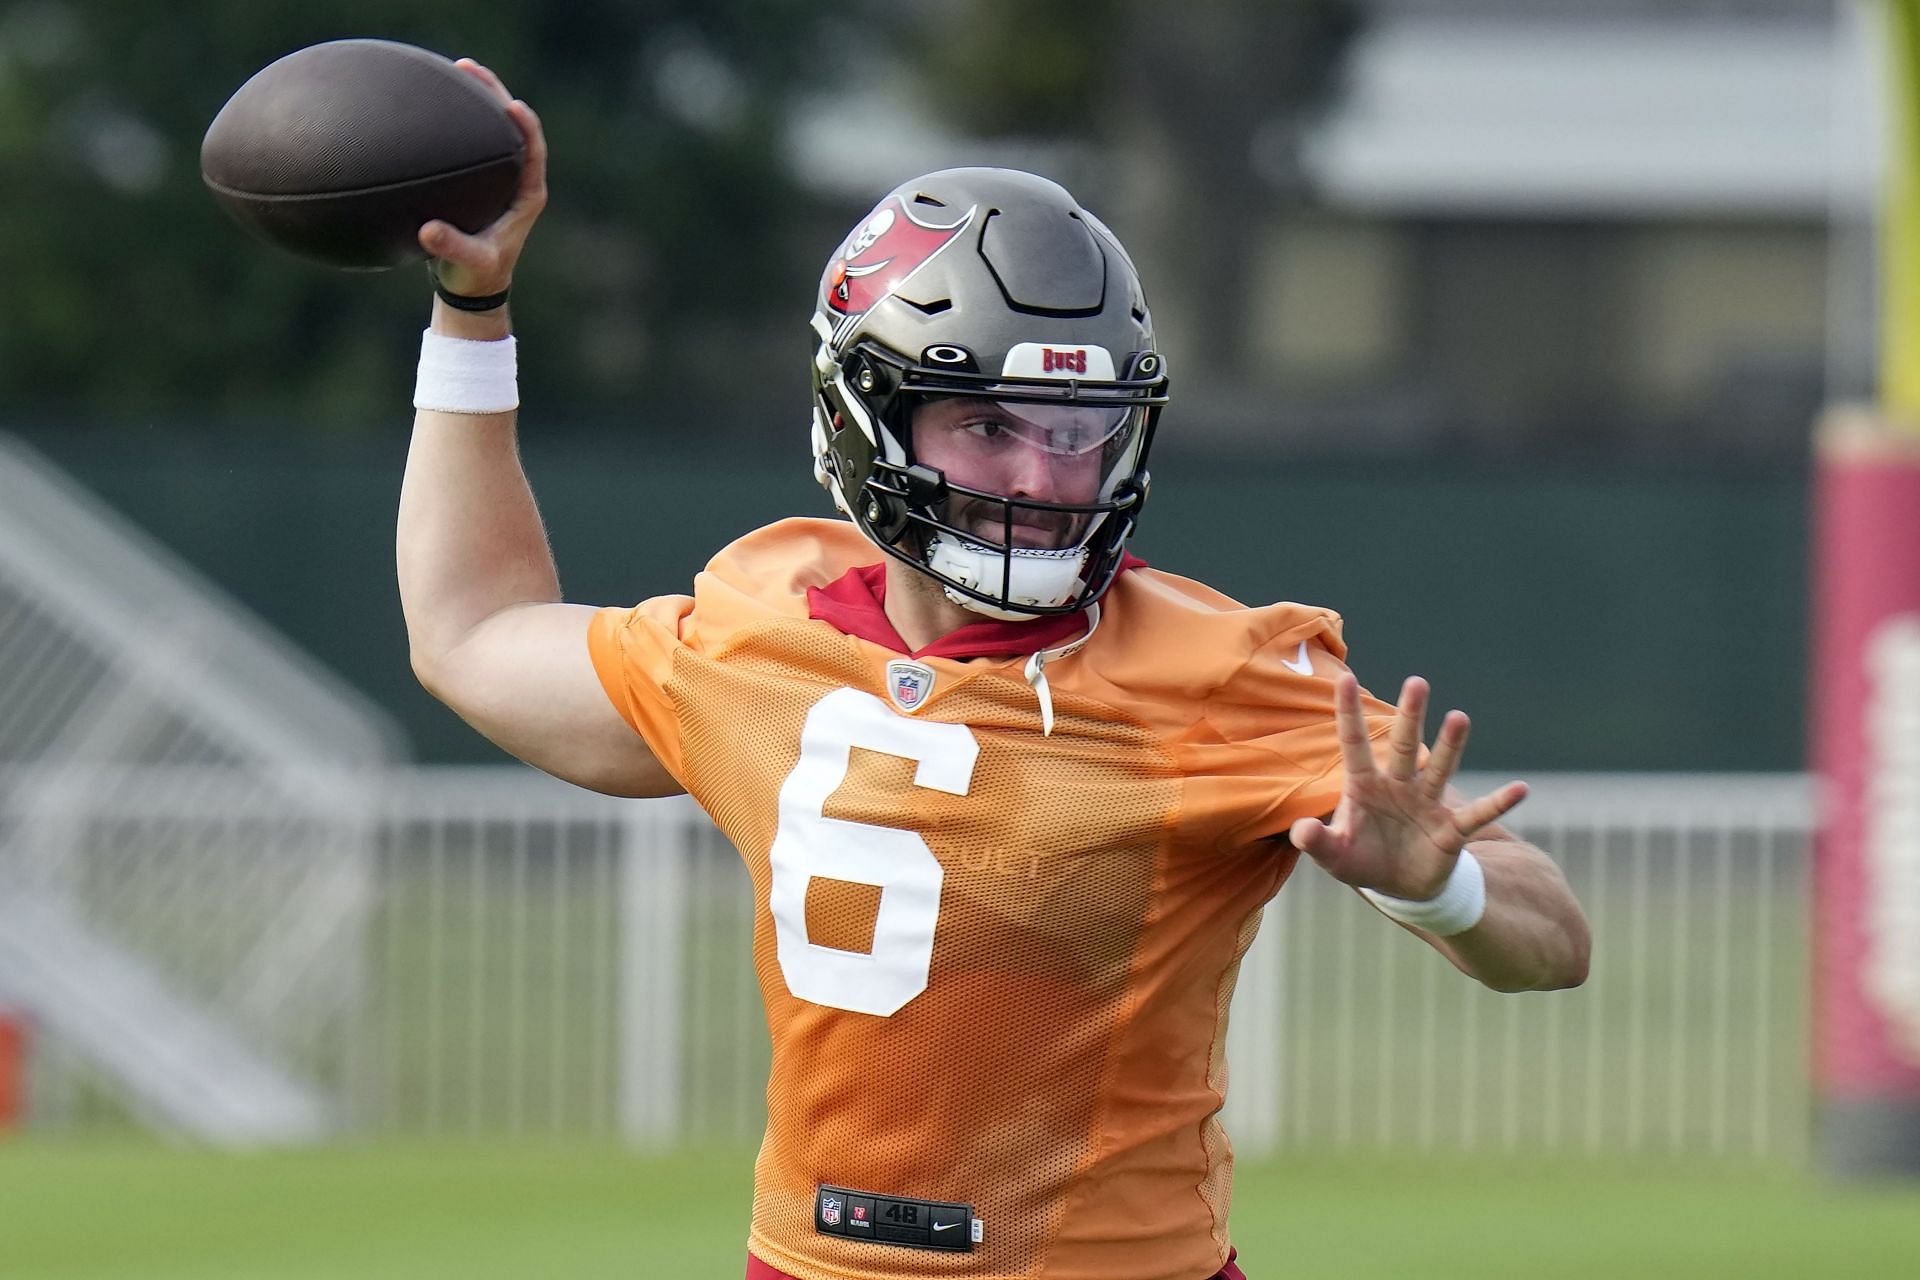 Mayfield at Buccaneers training camp